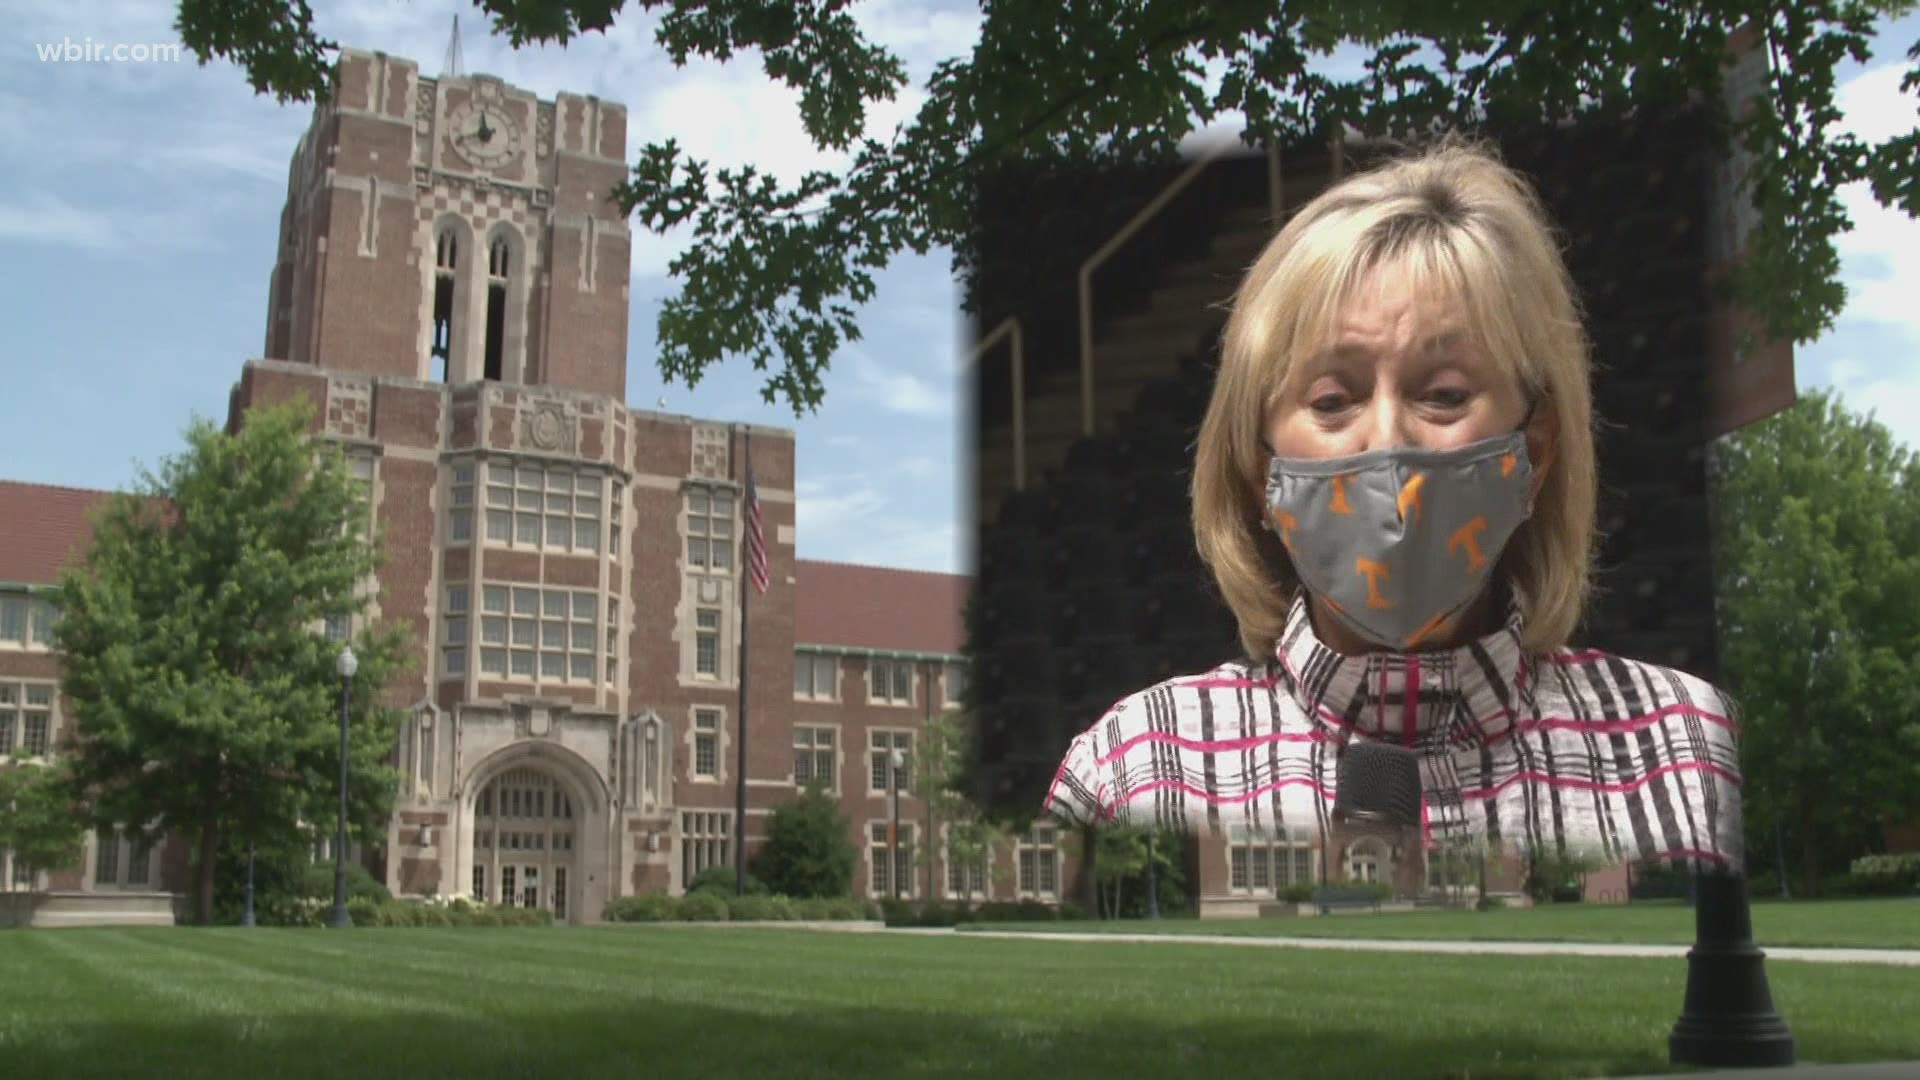 IN JUST THREE WEEKS, UNIVERSITY OF TENNESSEE STUDENTS WILL BE BACK IN CLASS. MASKS ARE REQUIRED FOR IN-PERSON LEARNING, BUT ABOUT HALF OF THE COURSES ARE ONLINE.